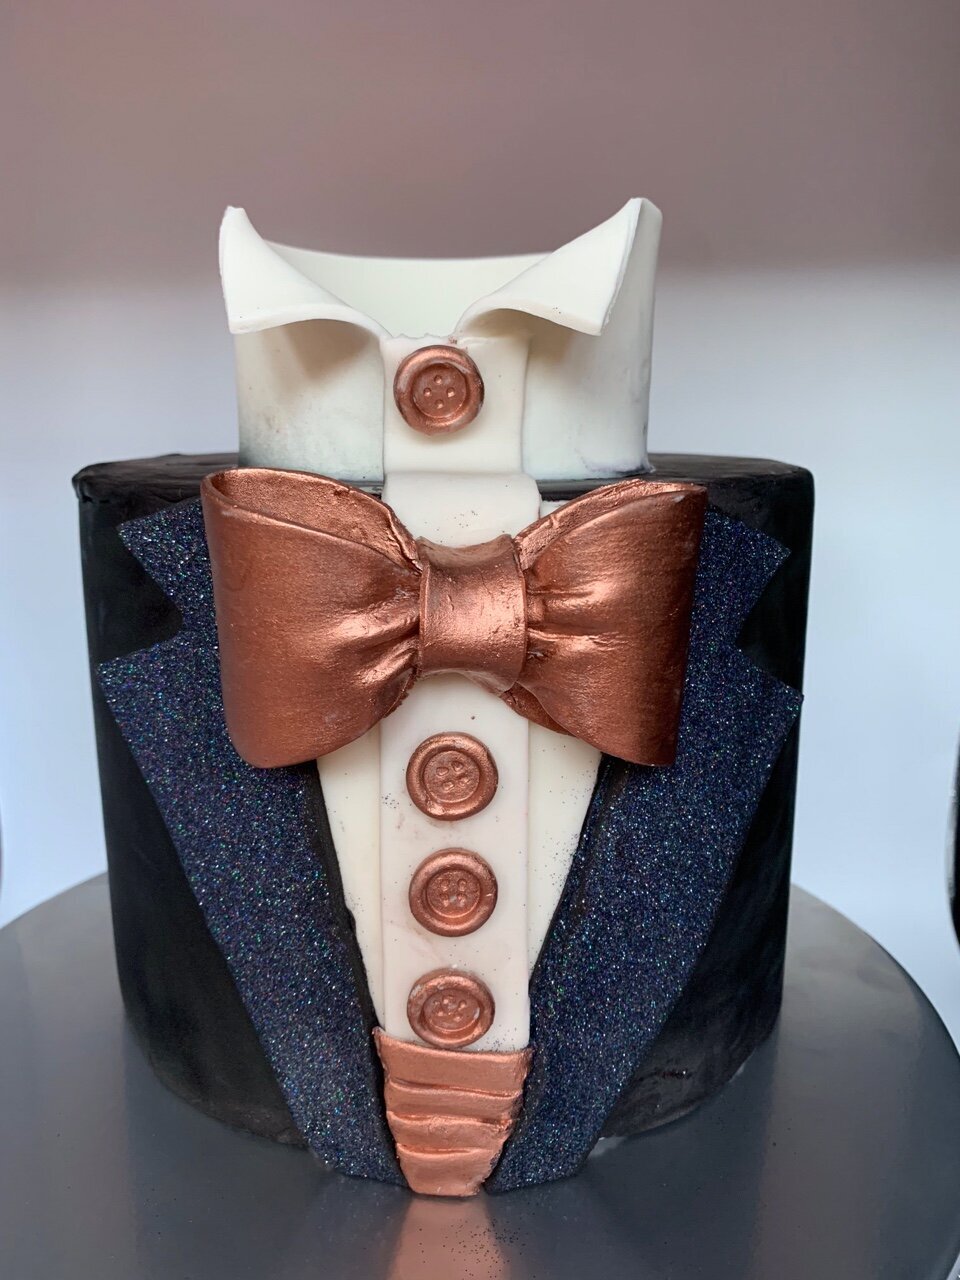 Single tier tuxedo cake design with shiny black labels, bronze colored bow tie, cummberbund, and buttons